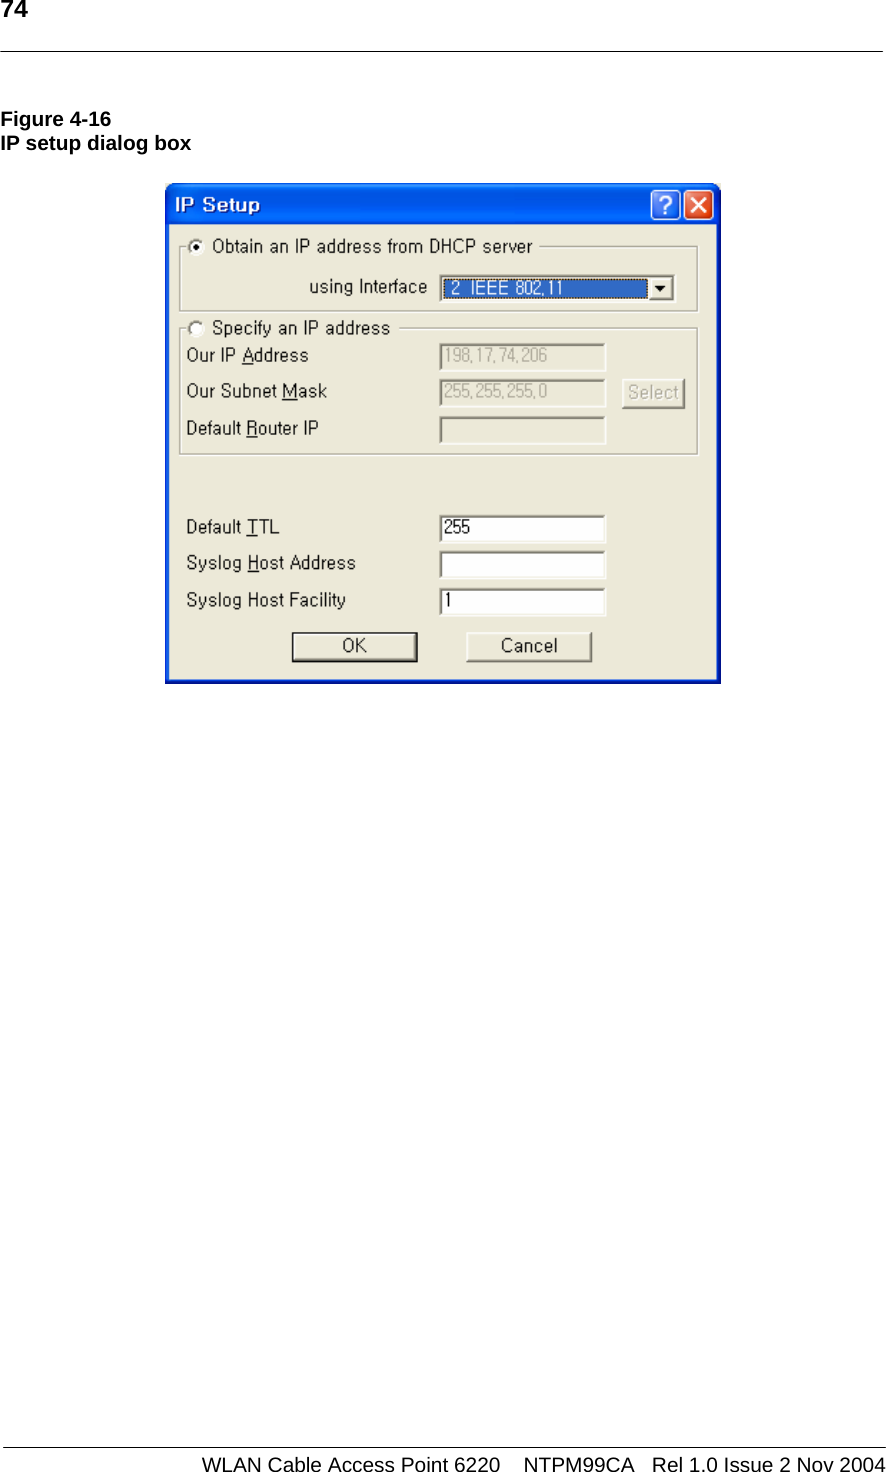   74  WLAN Cable Access Point 6220    NTPM99CA   Rel 1.0 Issue 2 Nov 2004 Figure 4-16 IP setup dialog box              